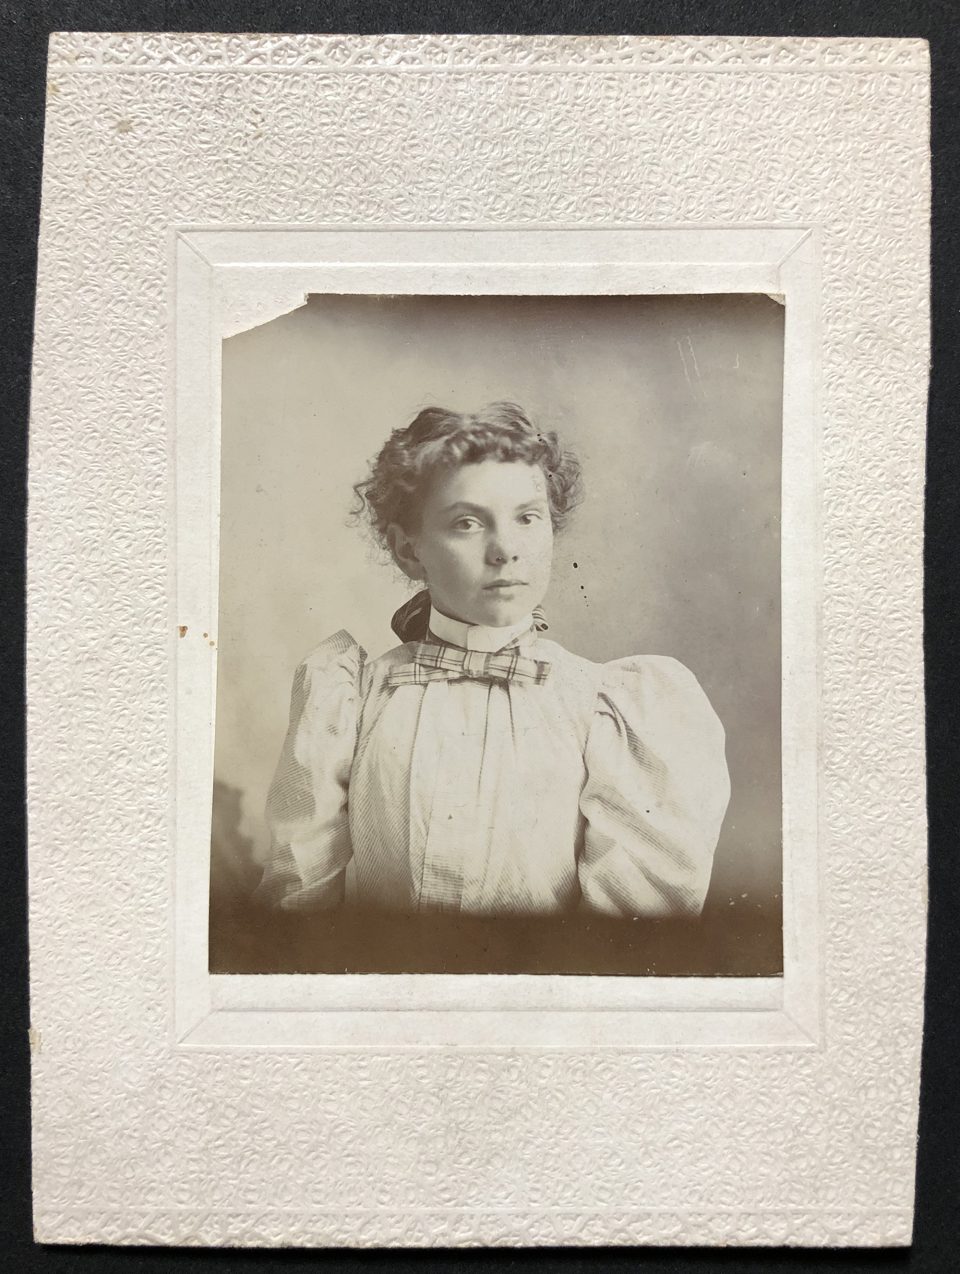 A small portrait of a girl by the studio of Carl Thiel, made in Duluth, although he also had a studio in Hibbing for a while. This pretty young lady seems to display some attitude in her direct yet somewhat askance gaze. This appears to be a gelatin silver photograph rather than an albumen print.